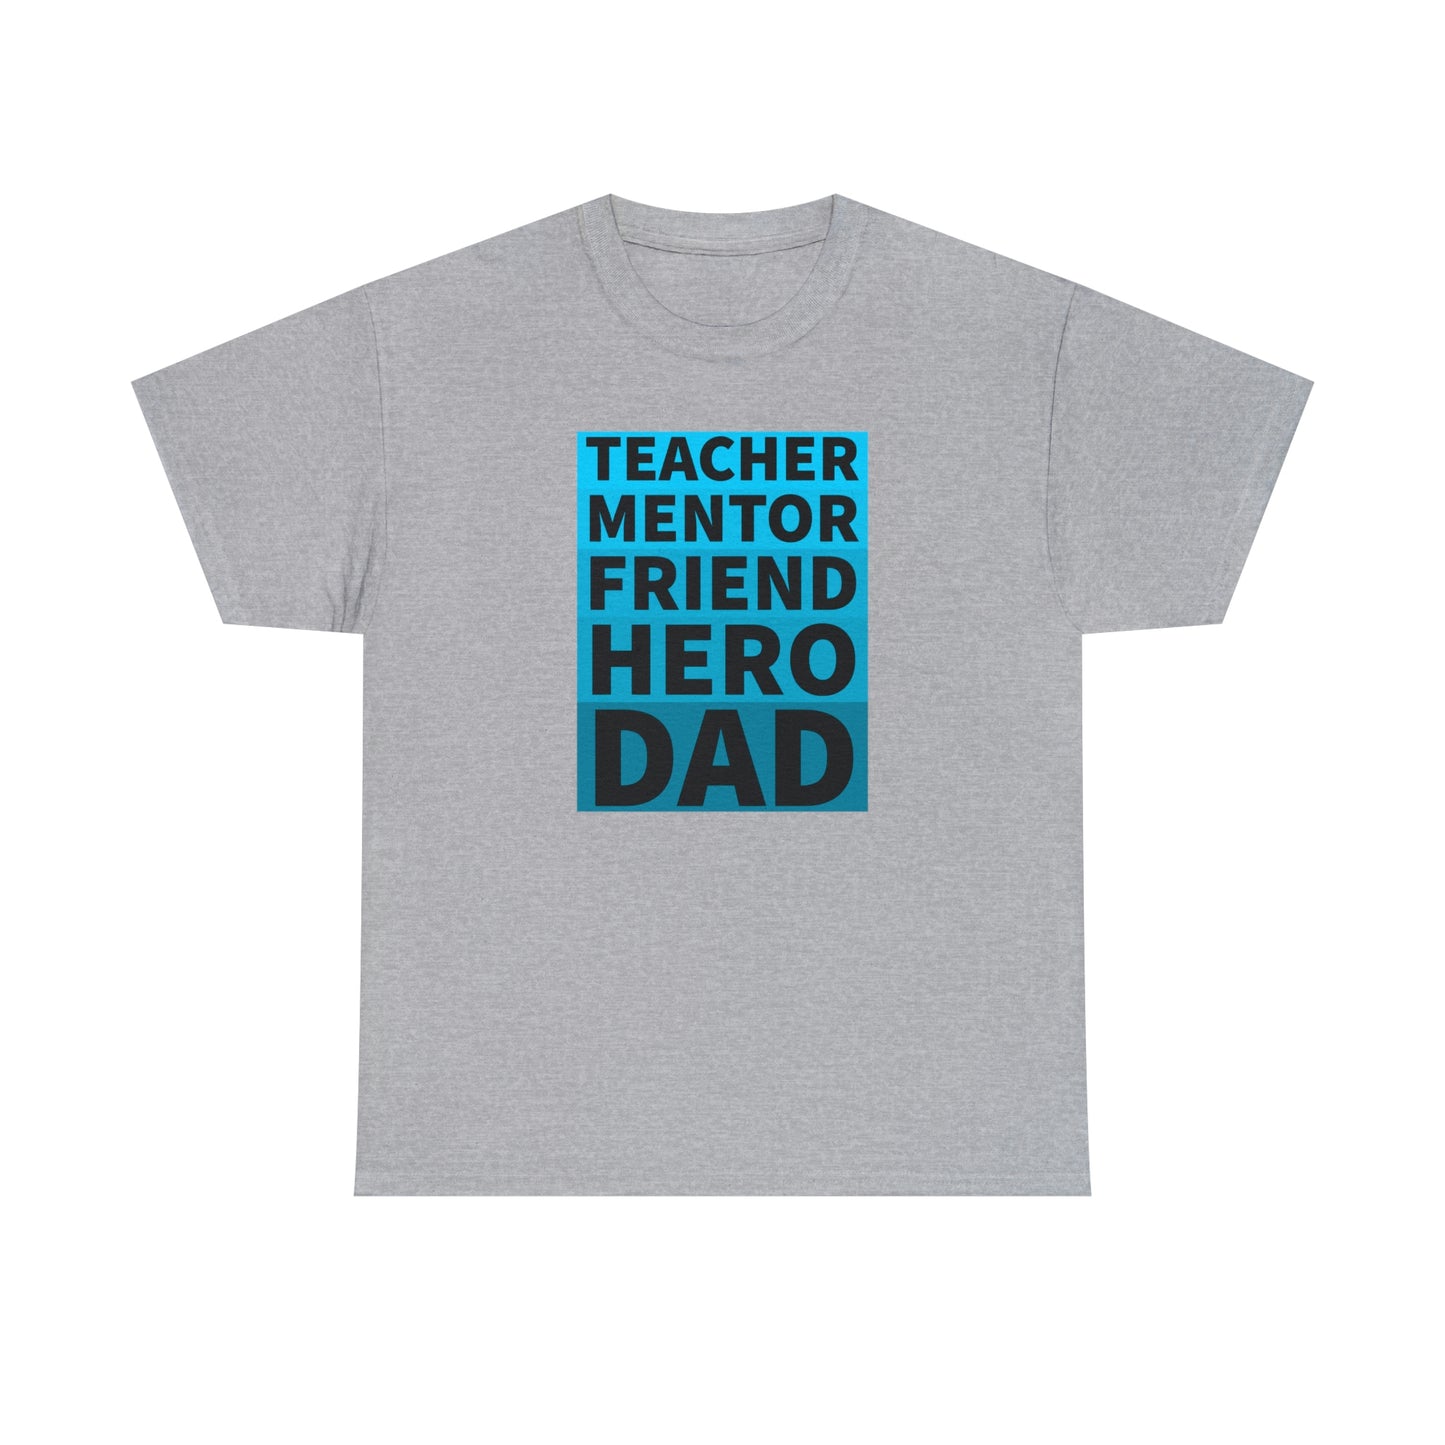 Dad T-Shirt For Father's Day TShirt For Mentor T Shirt For Hero Shirt For Friend T-Shirt For Teacher Shirt For Birthday TShirt for Best Dad Shirt